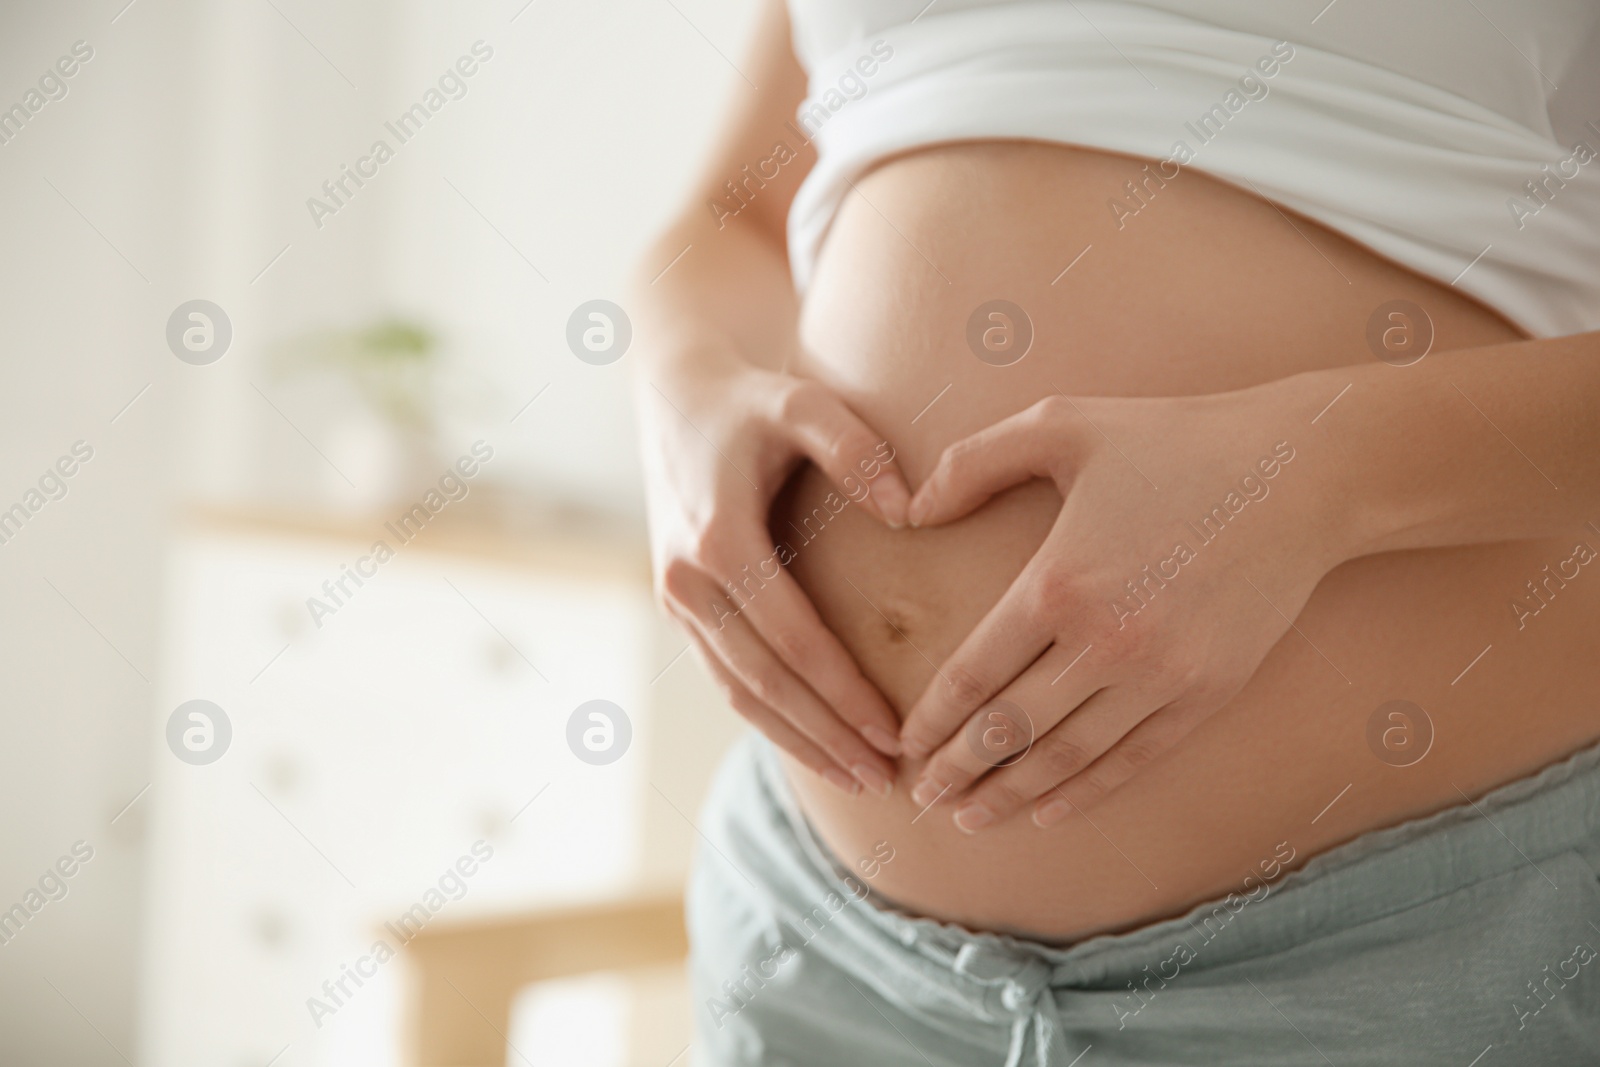 Photo of Pregnant woman making heart with her hands near belly indoors, closeup